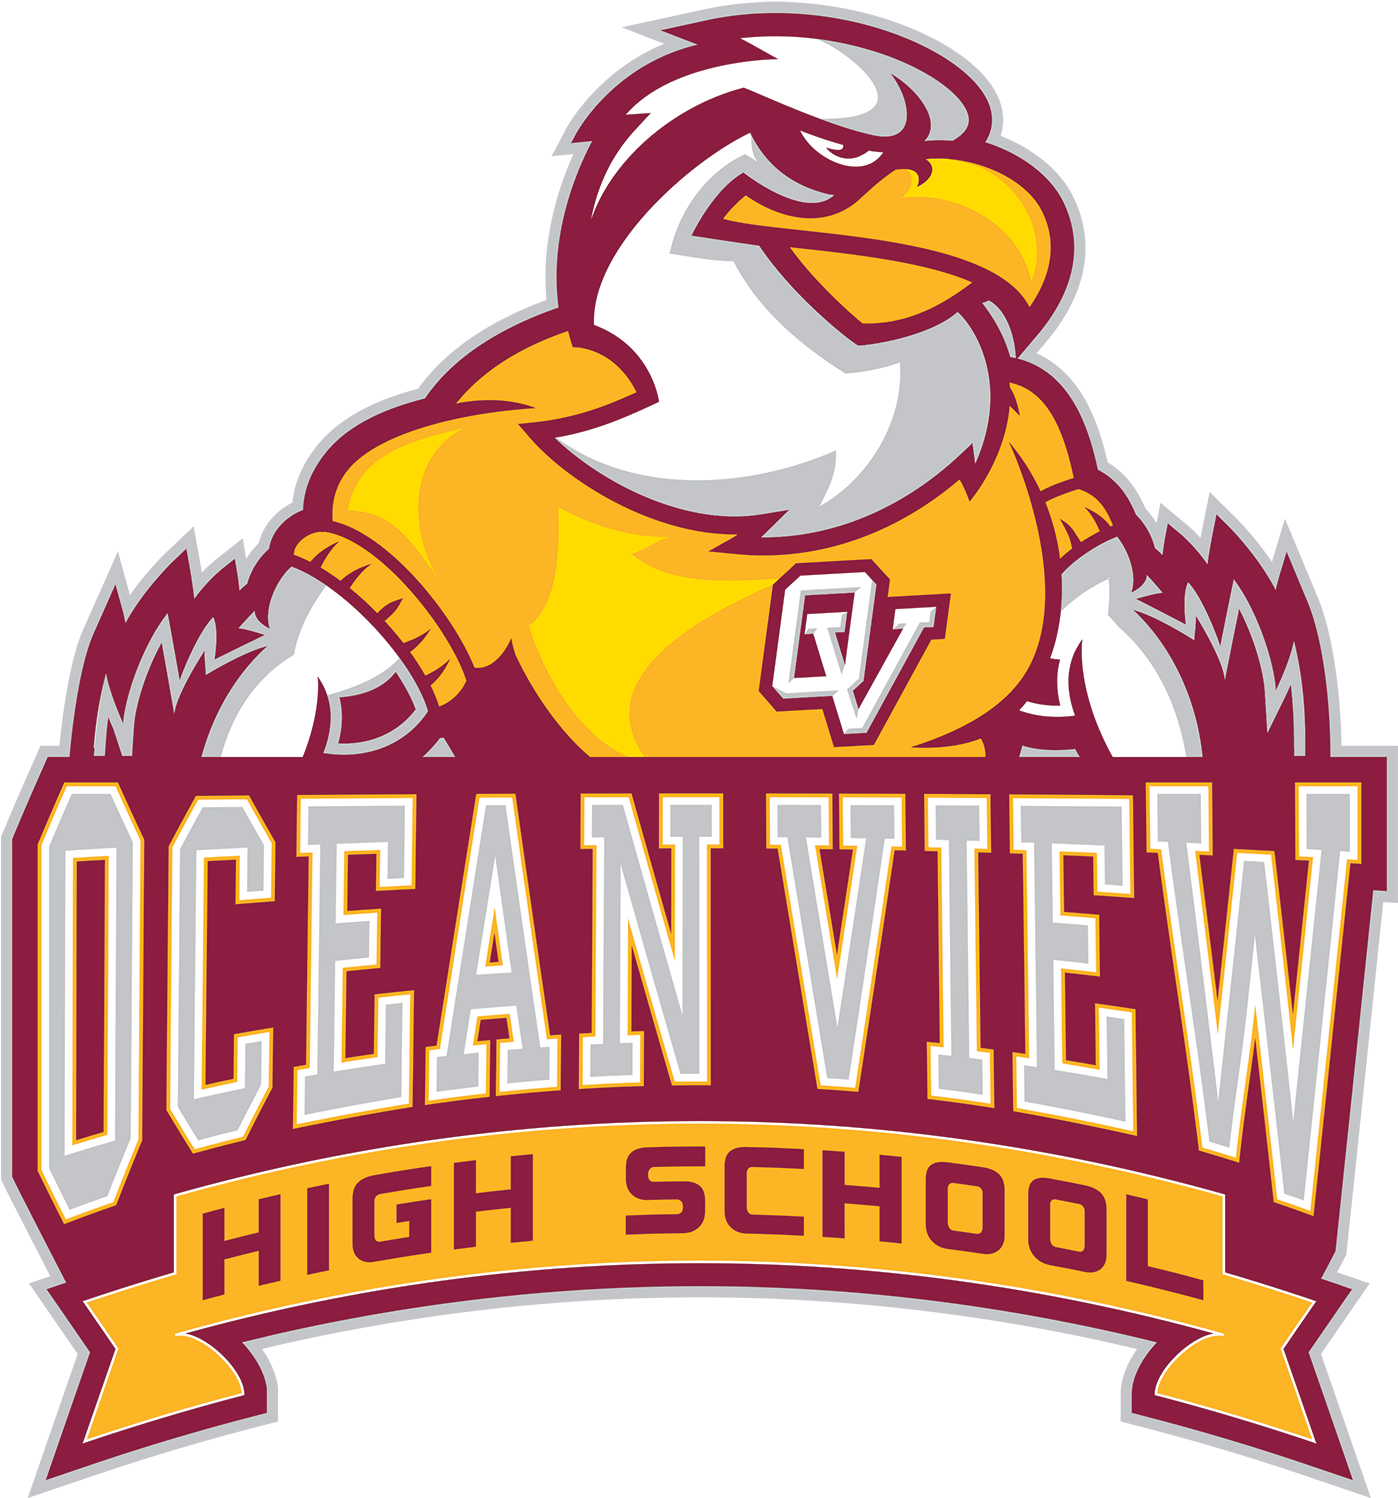 OVHS logo: Seahawk in OV shirt image with "Ocean View High School" text below